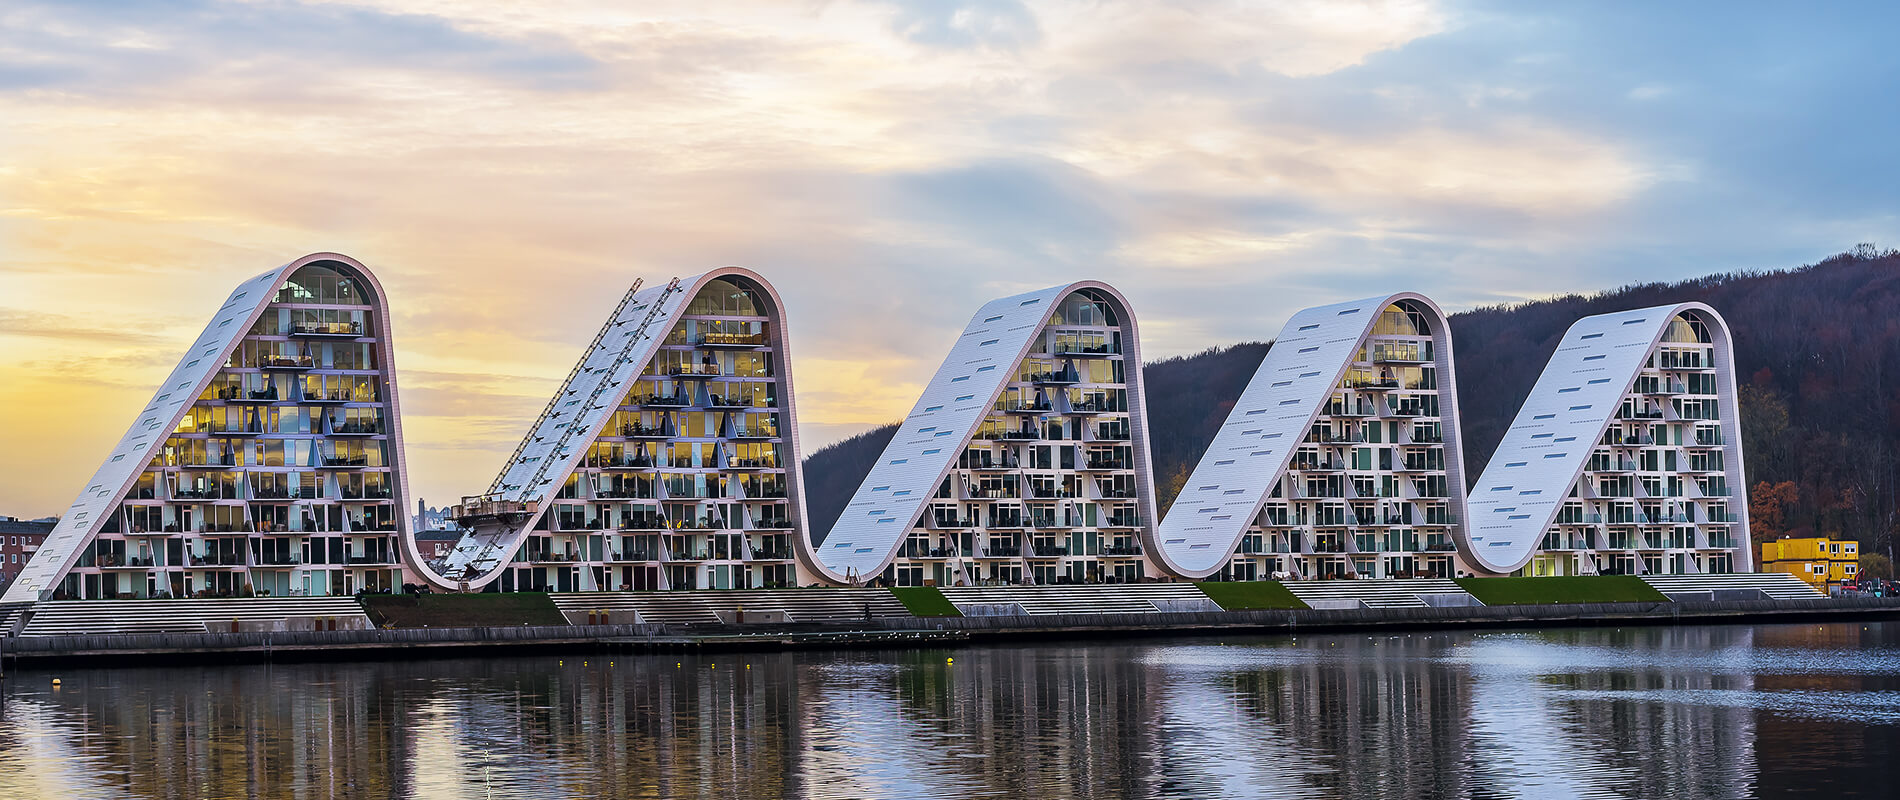 The Wave, a magnificent collection of manmade “waves” along the Vejle Fjord